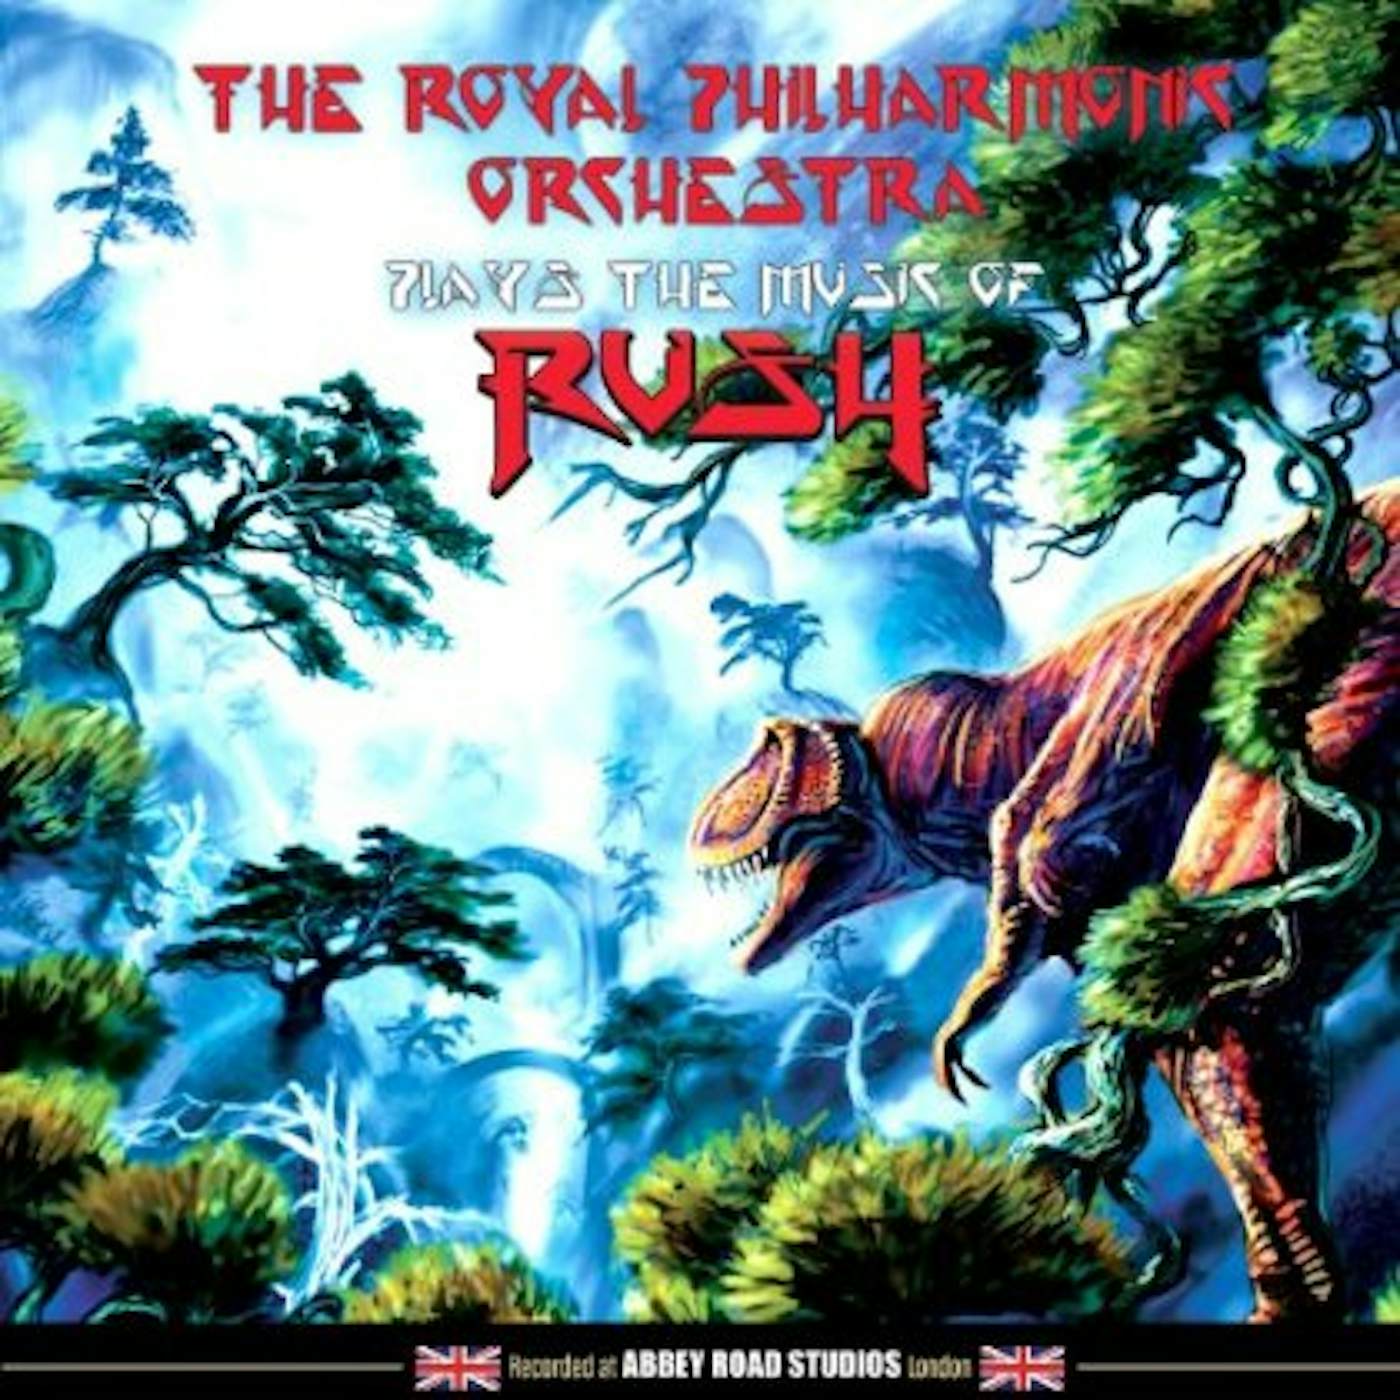 Royal Philharmonic Orchestra Plays the Music of Rush Vinyl Record